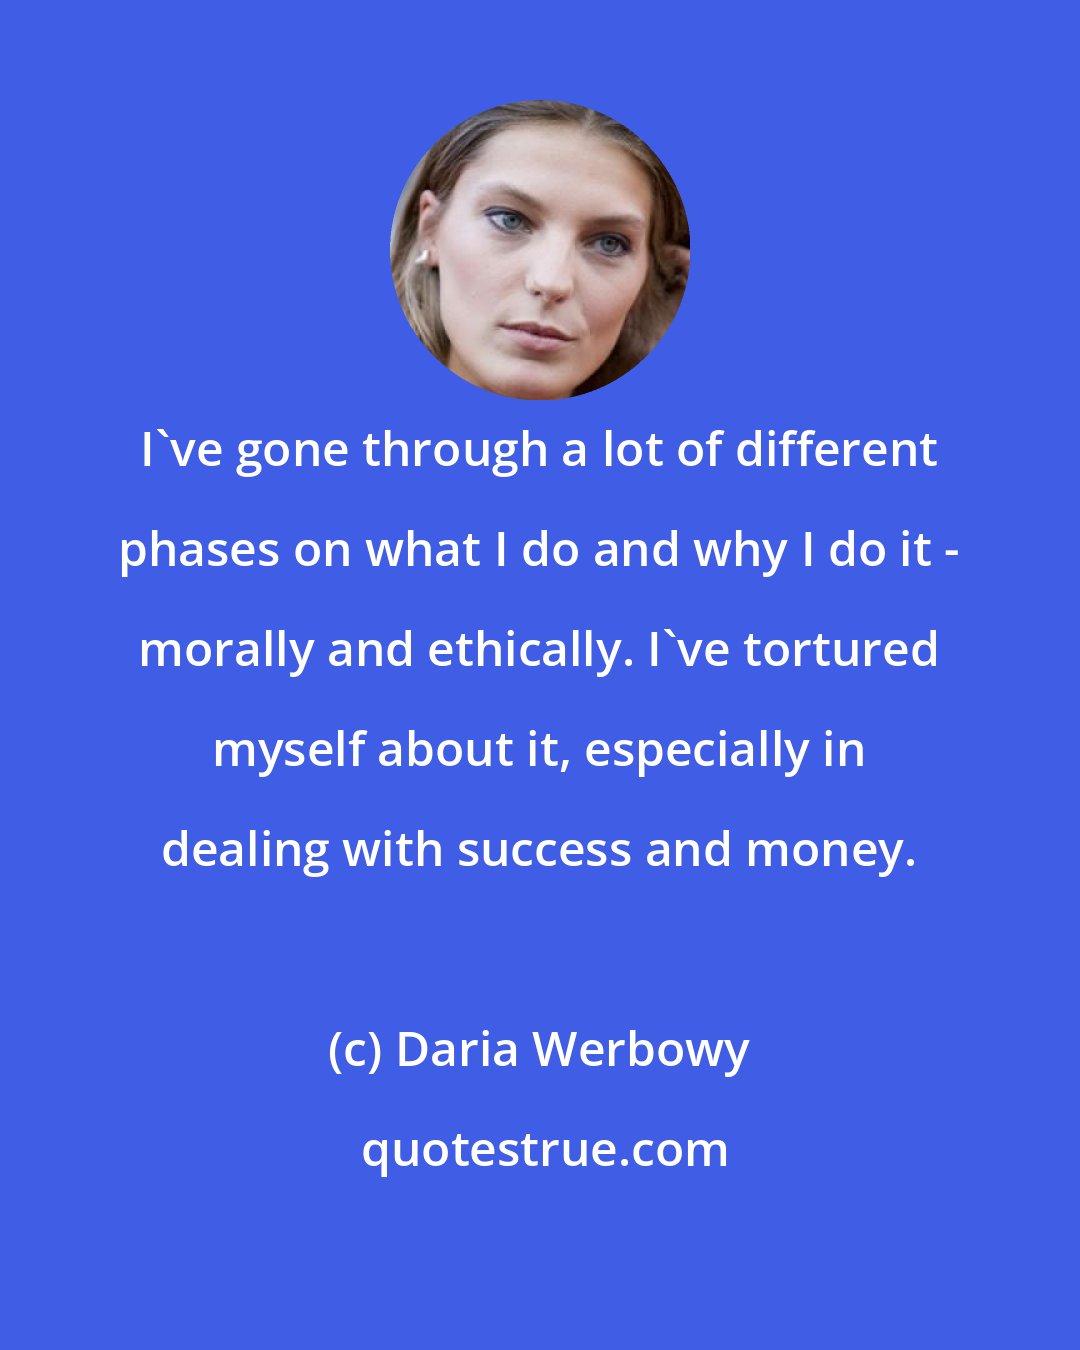 Daria Werbowy: I've gone through a lot of different phases on what I do and why I do it - morally and ethically. I've tortured myself about it, especially in dealing with success and money.